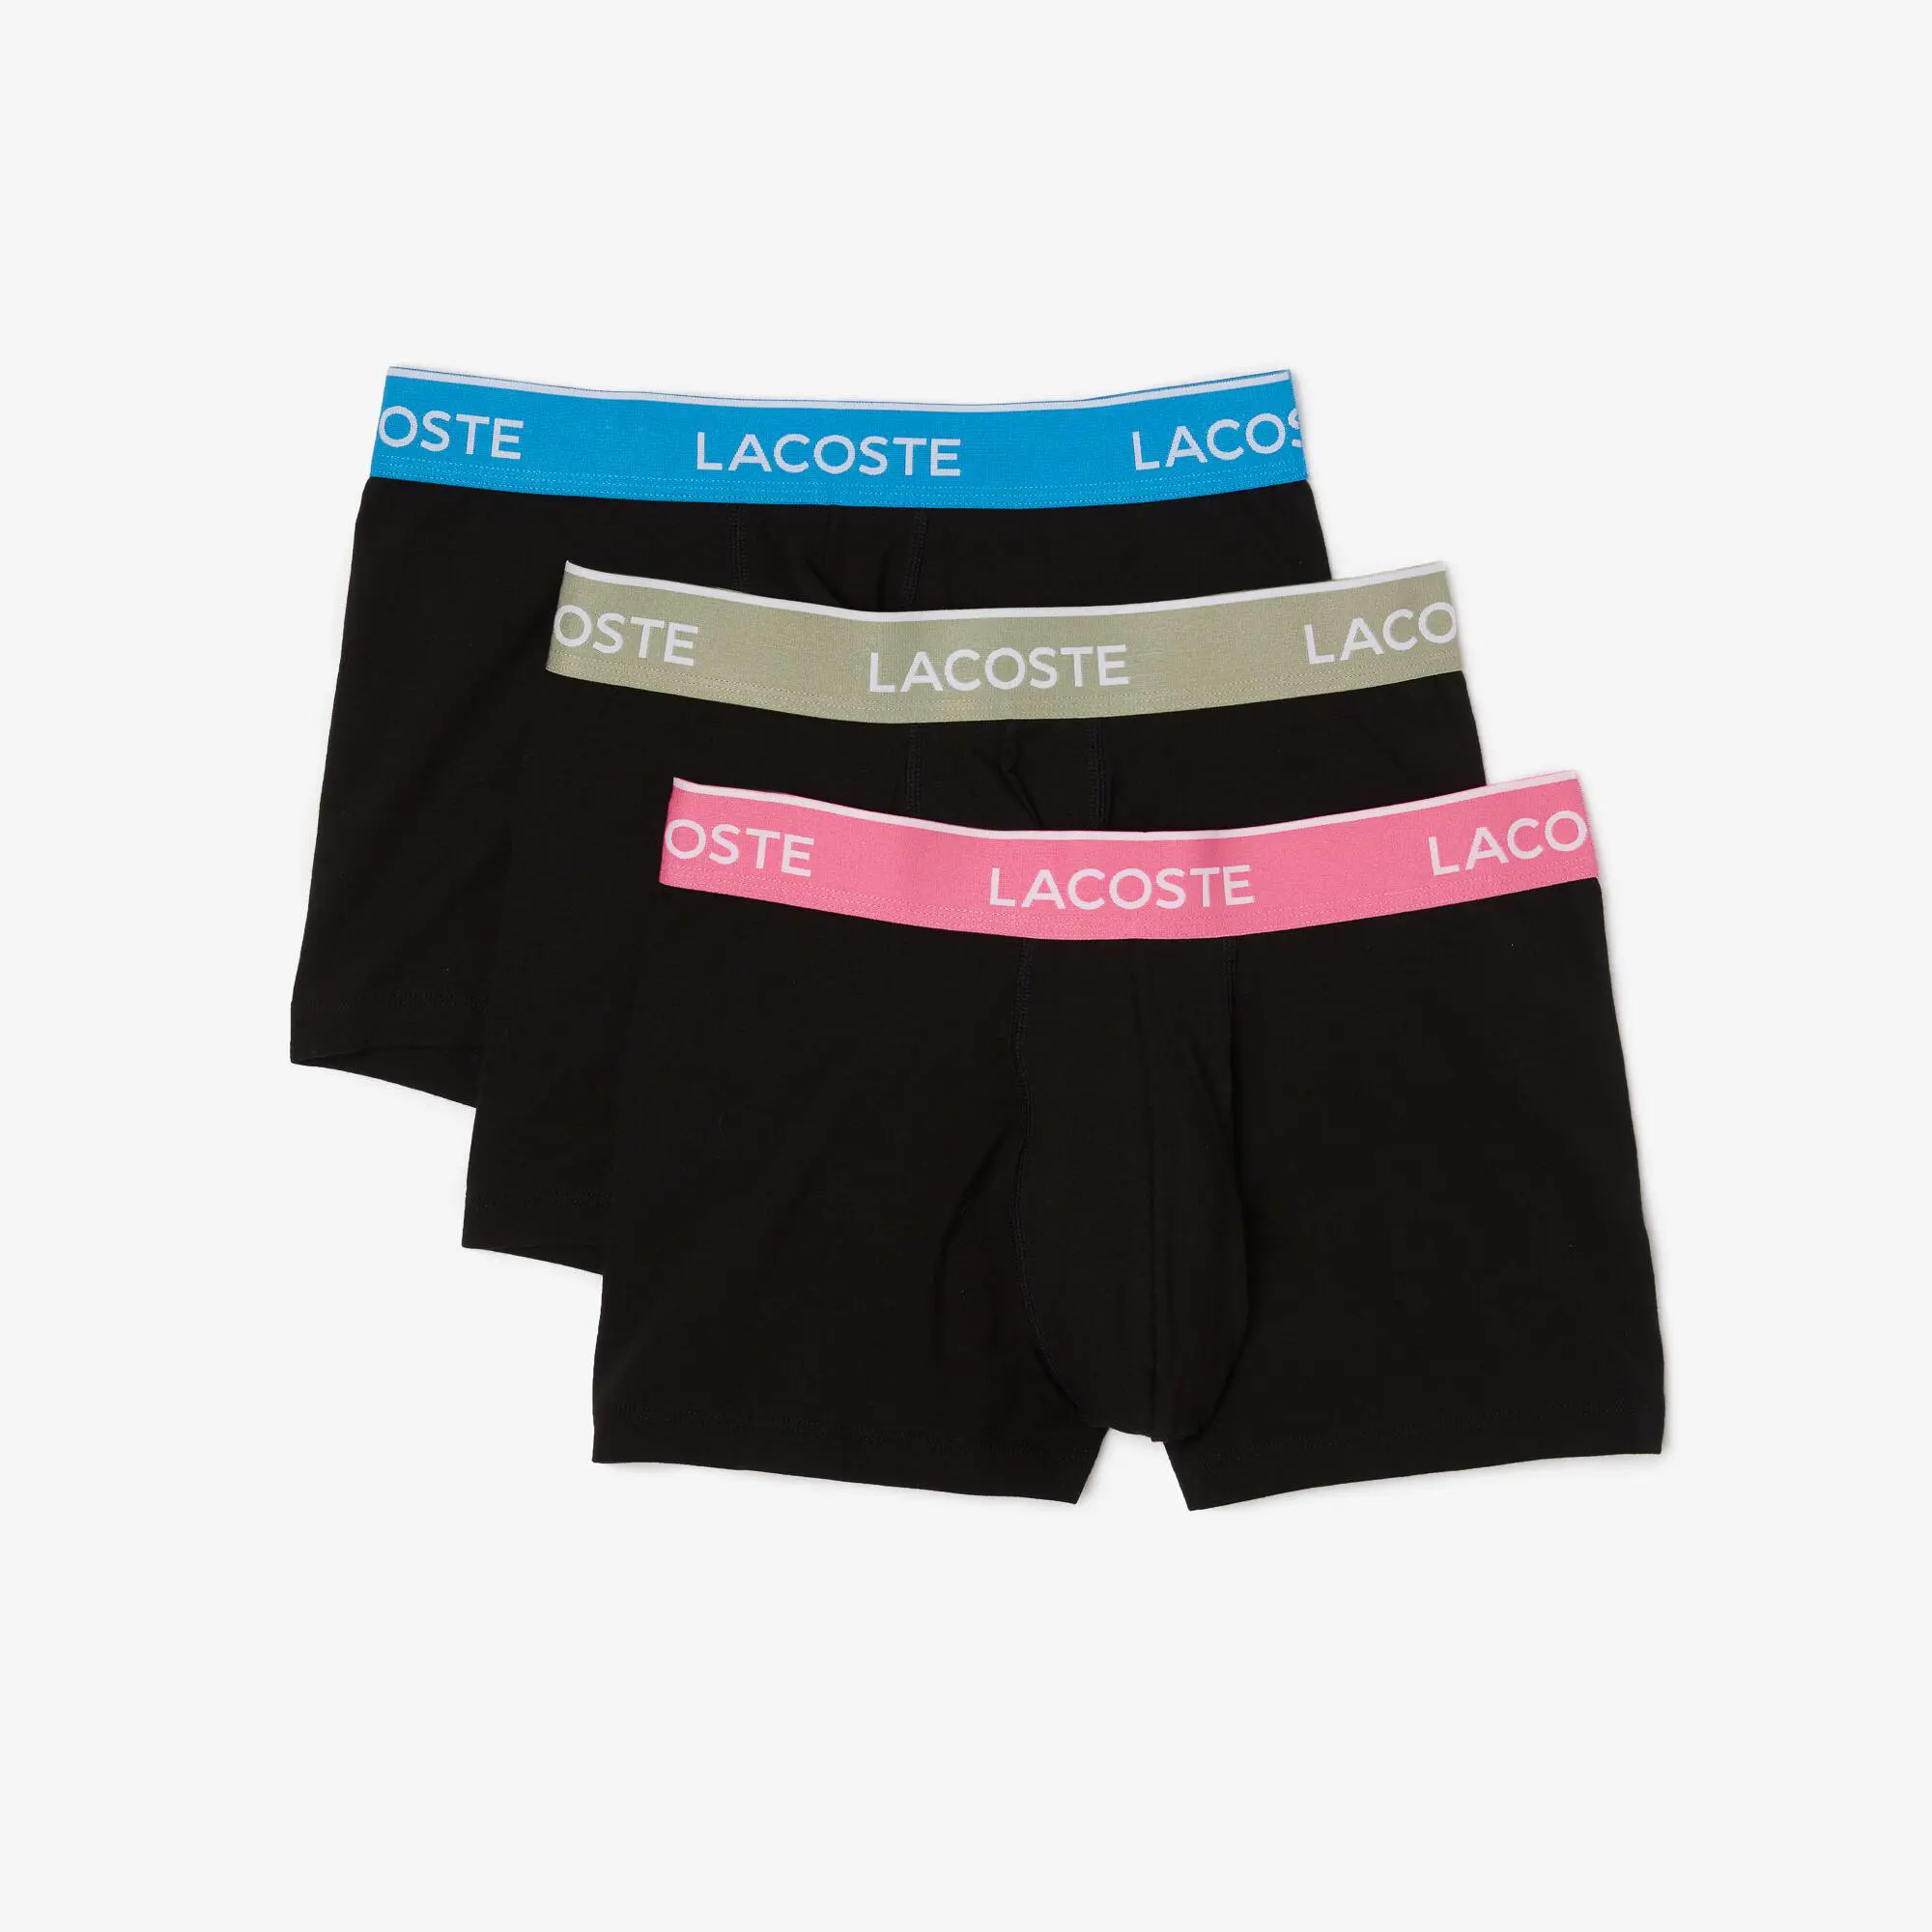 Lacoste Pack Of 3 Navy Casual Trunks With Contrasting Waistband. 2